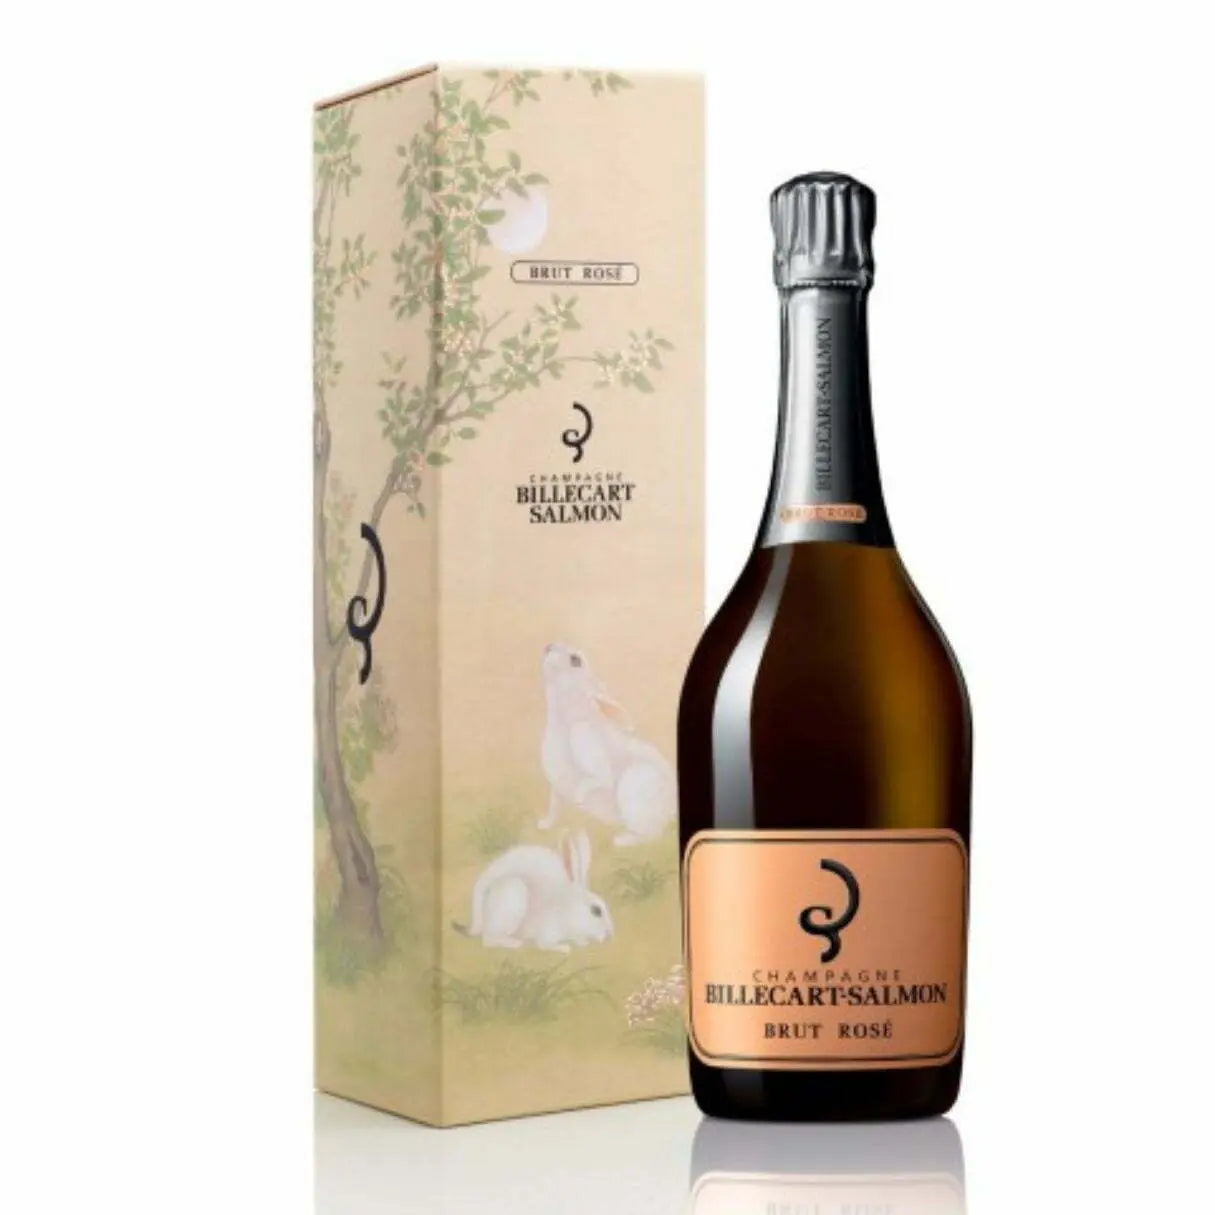 Billecart Salmon Brut Rose NV "Year Of Rabbit" Gift Box (Limited Edition) (1x75cl) - TwoMoreGlasses.com